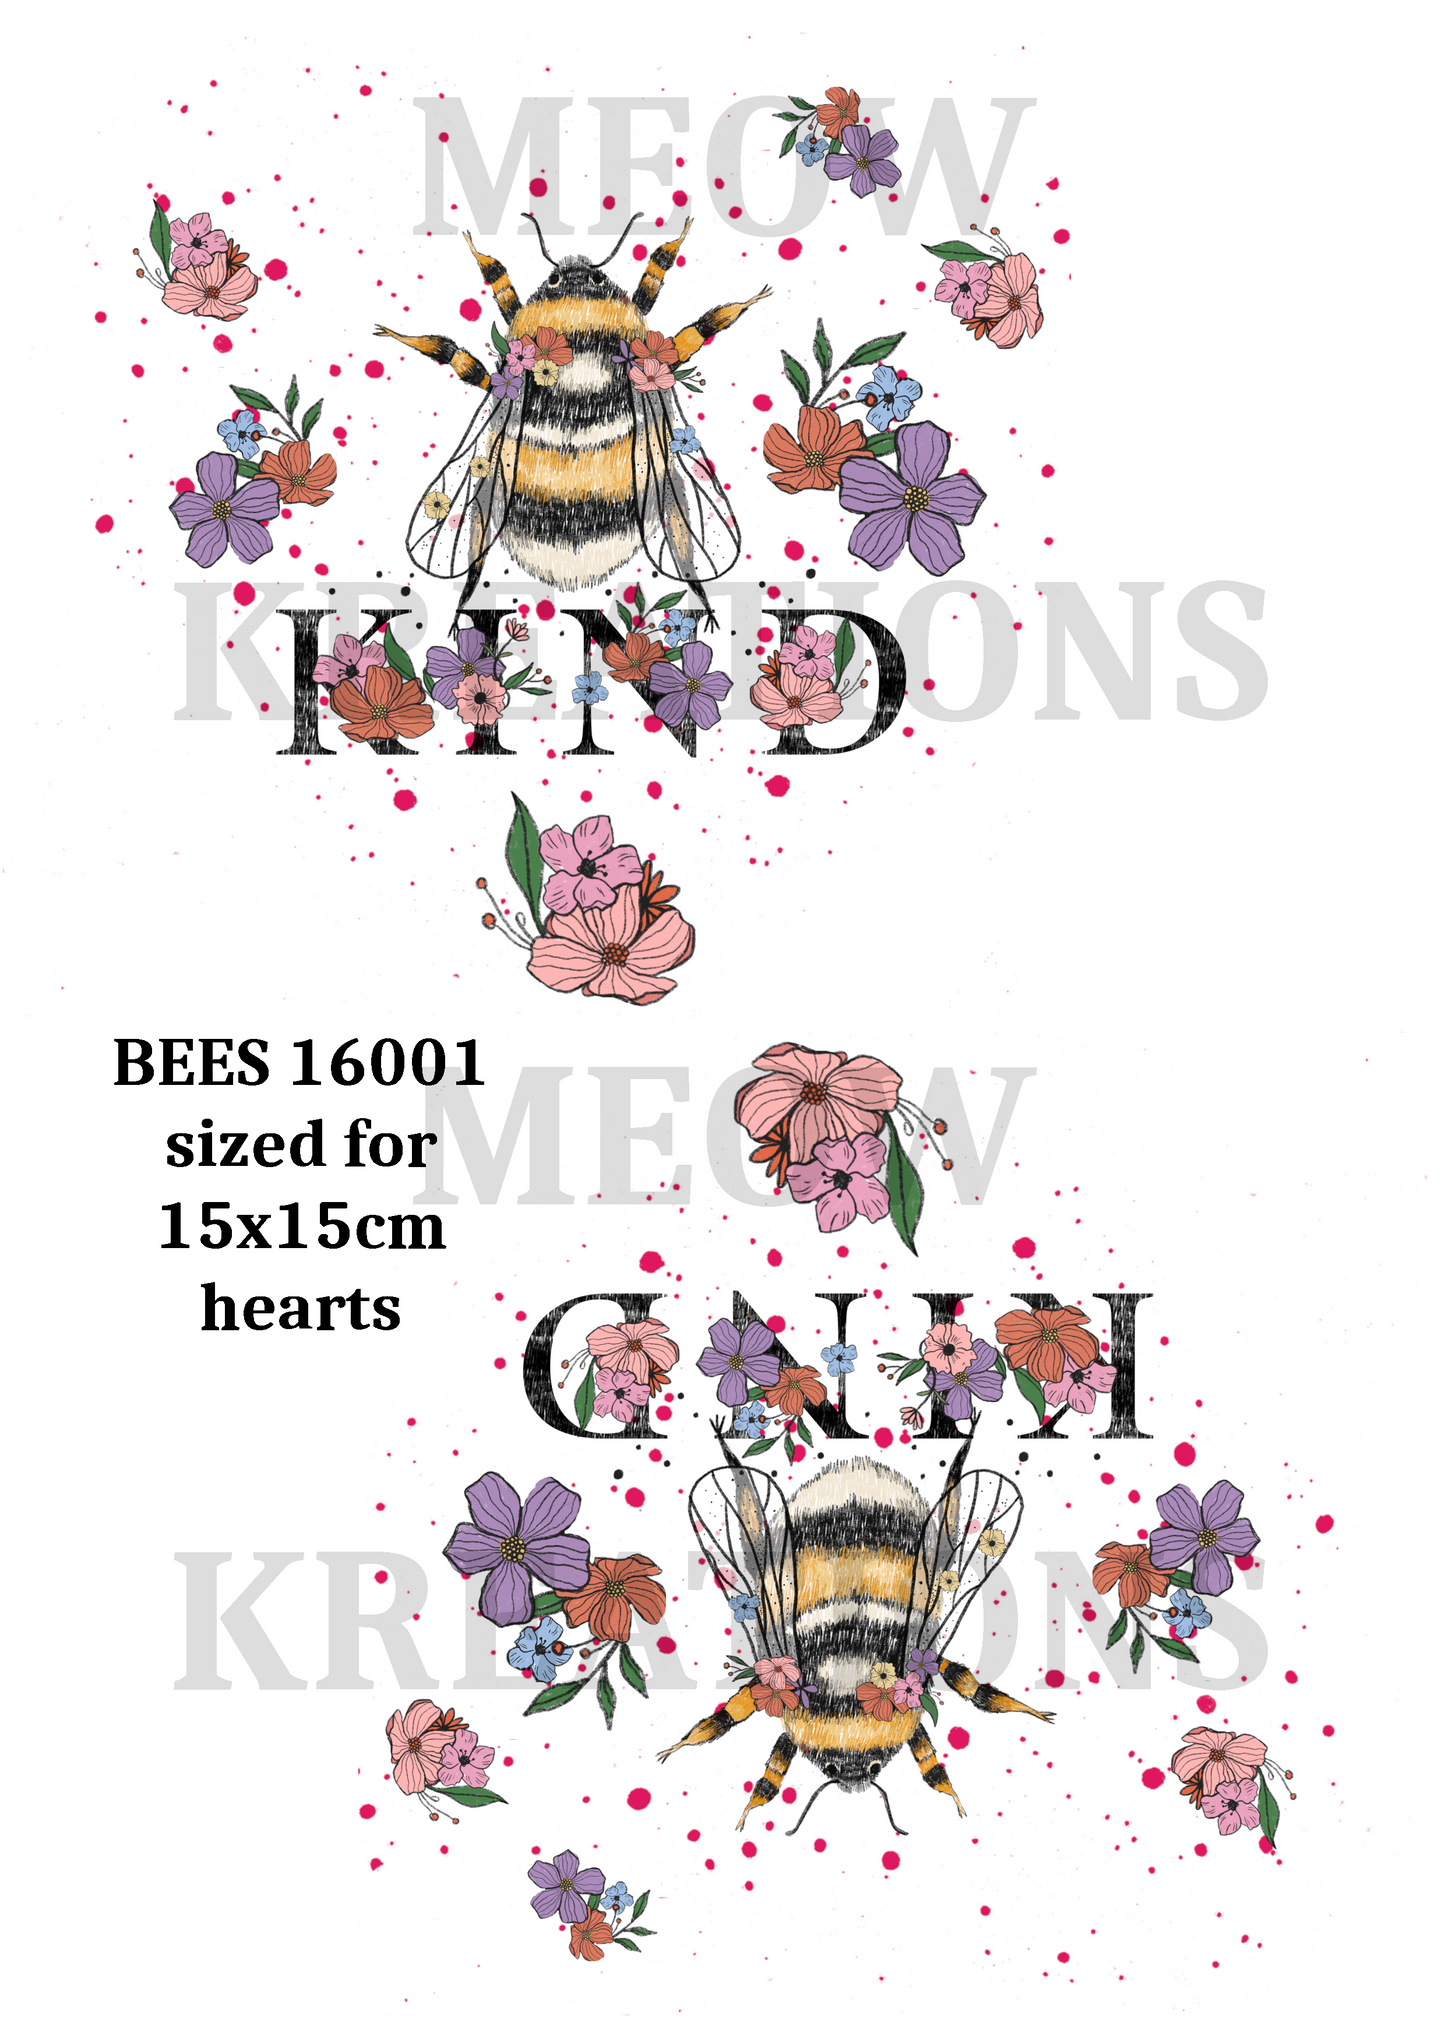 BEES 16001